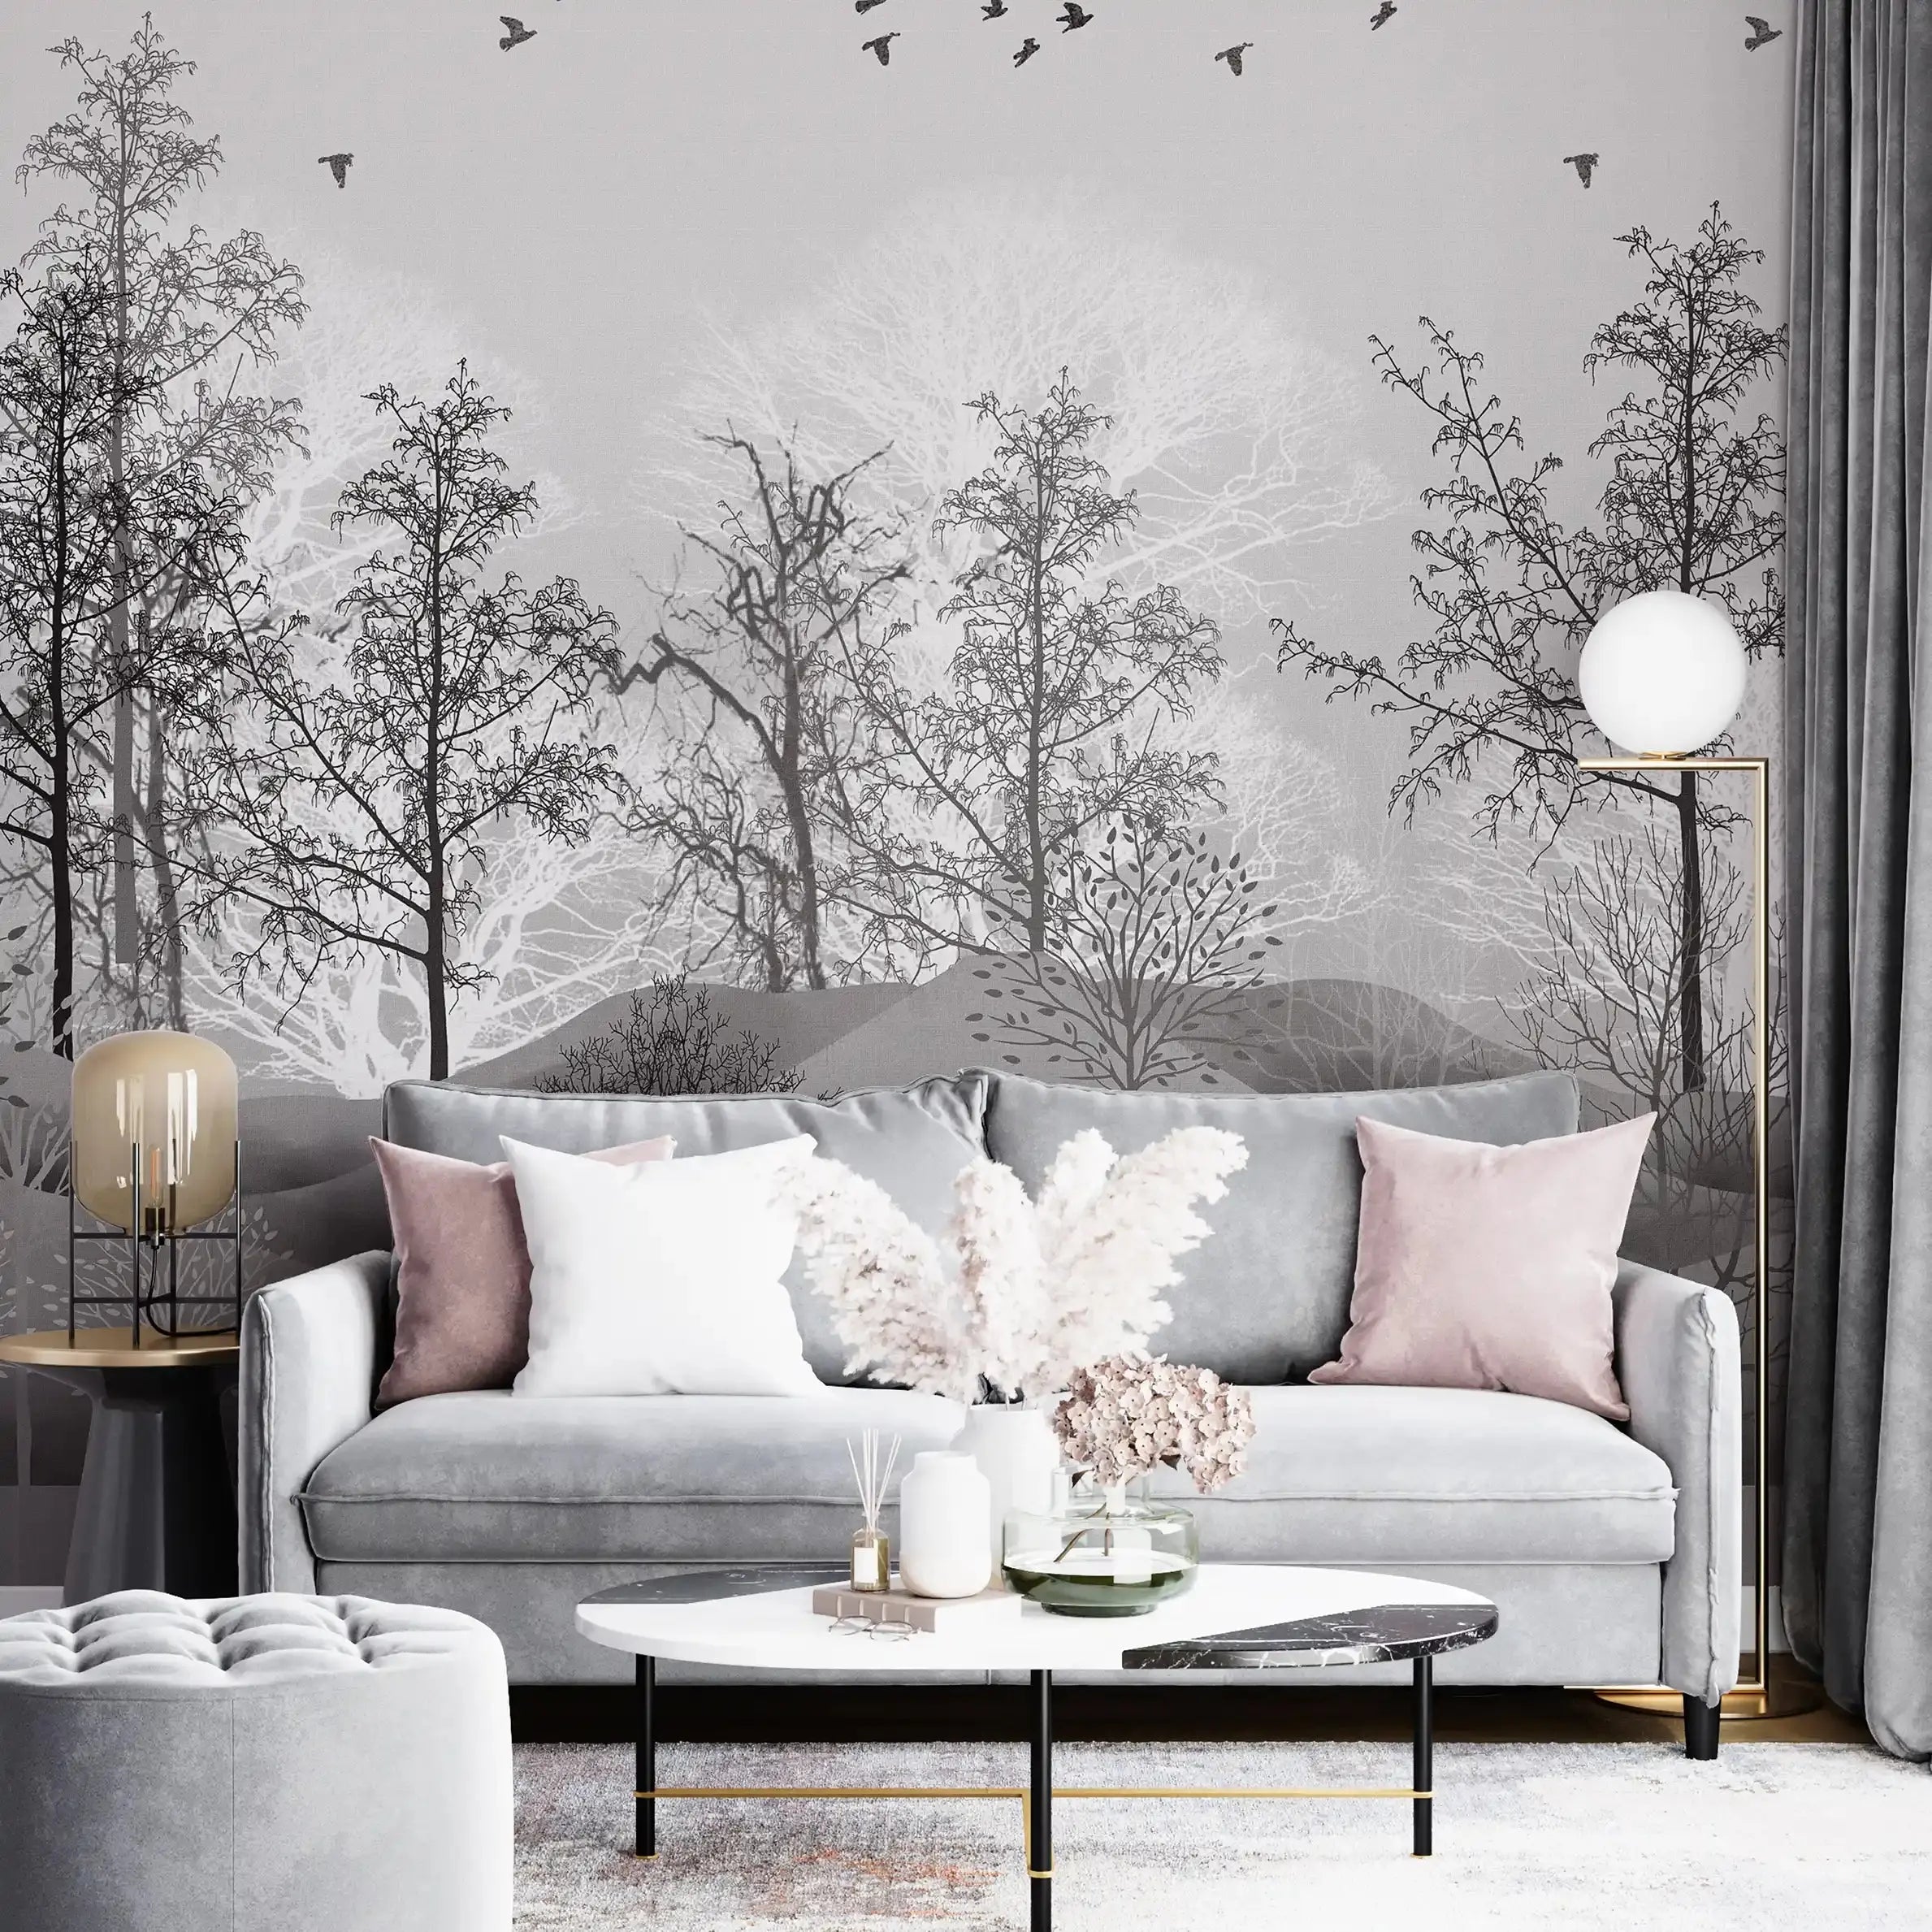 3040-E / Nature-Inspired Peel and Stick Wallpaper: Winter Landscape with Trees and Birds, Perfect for Bathroom and Bedroom - Artevella